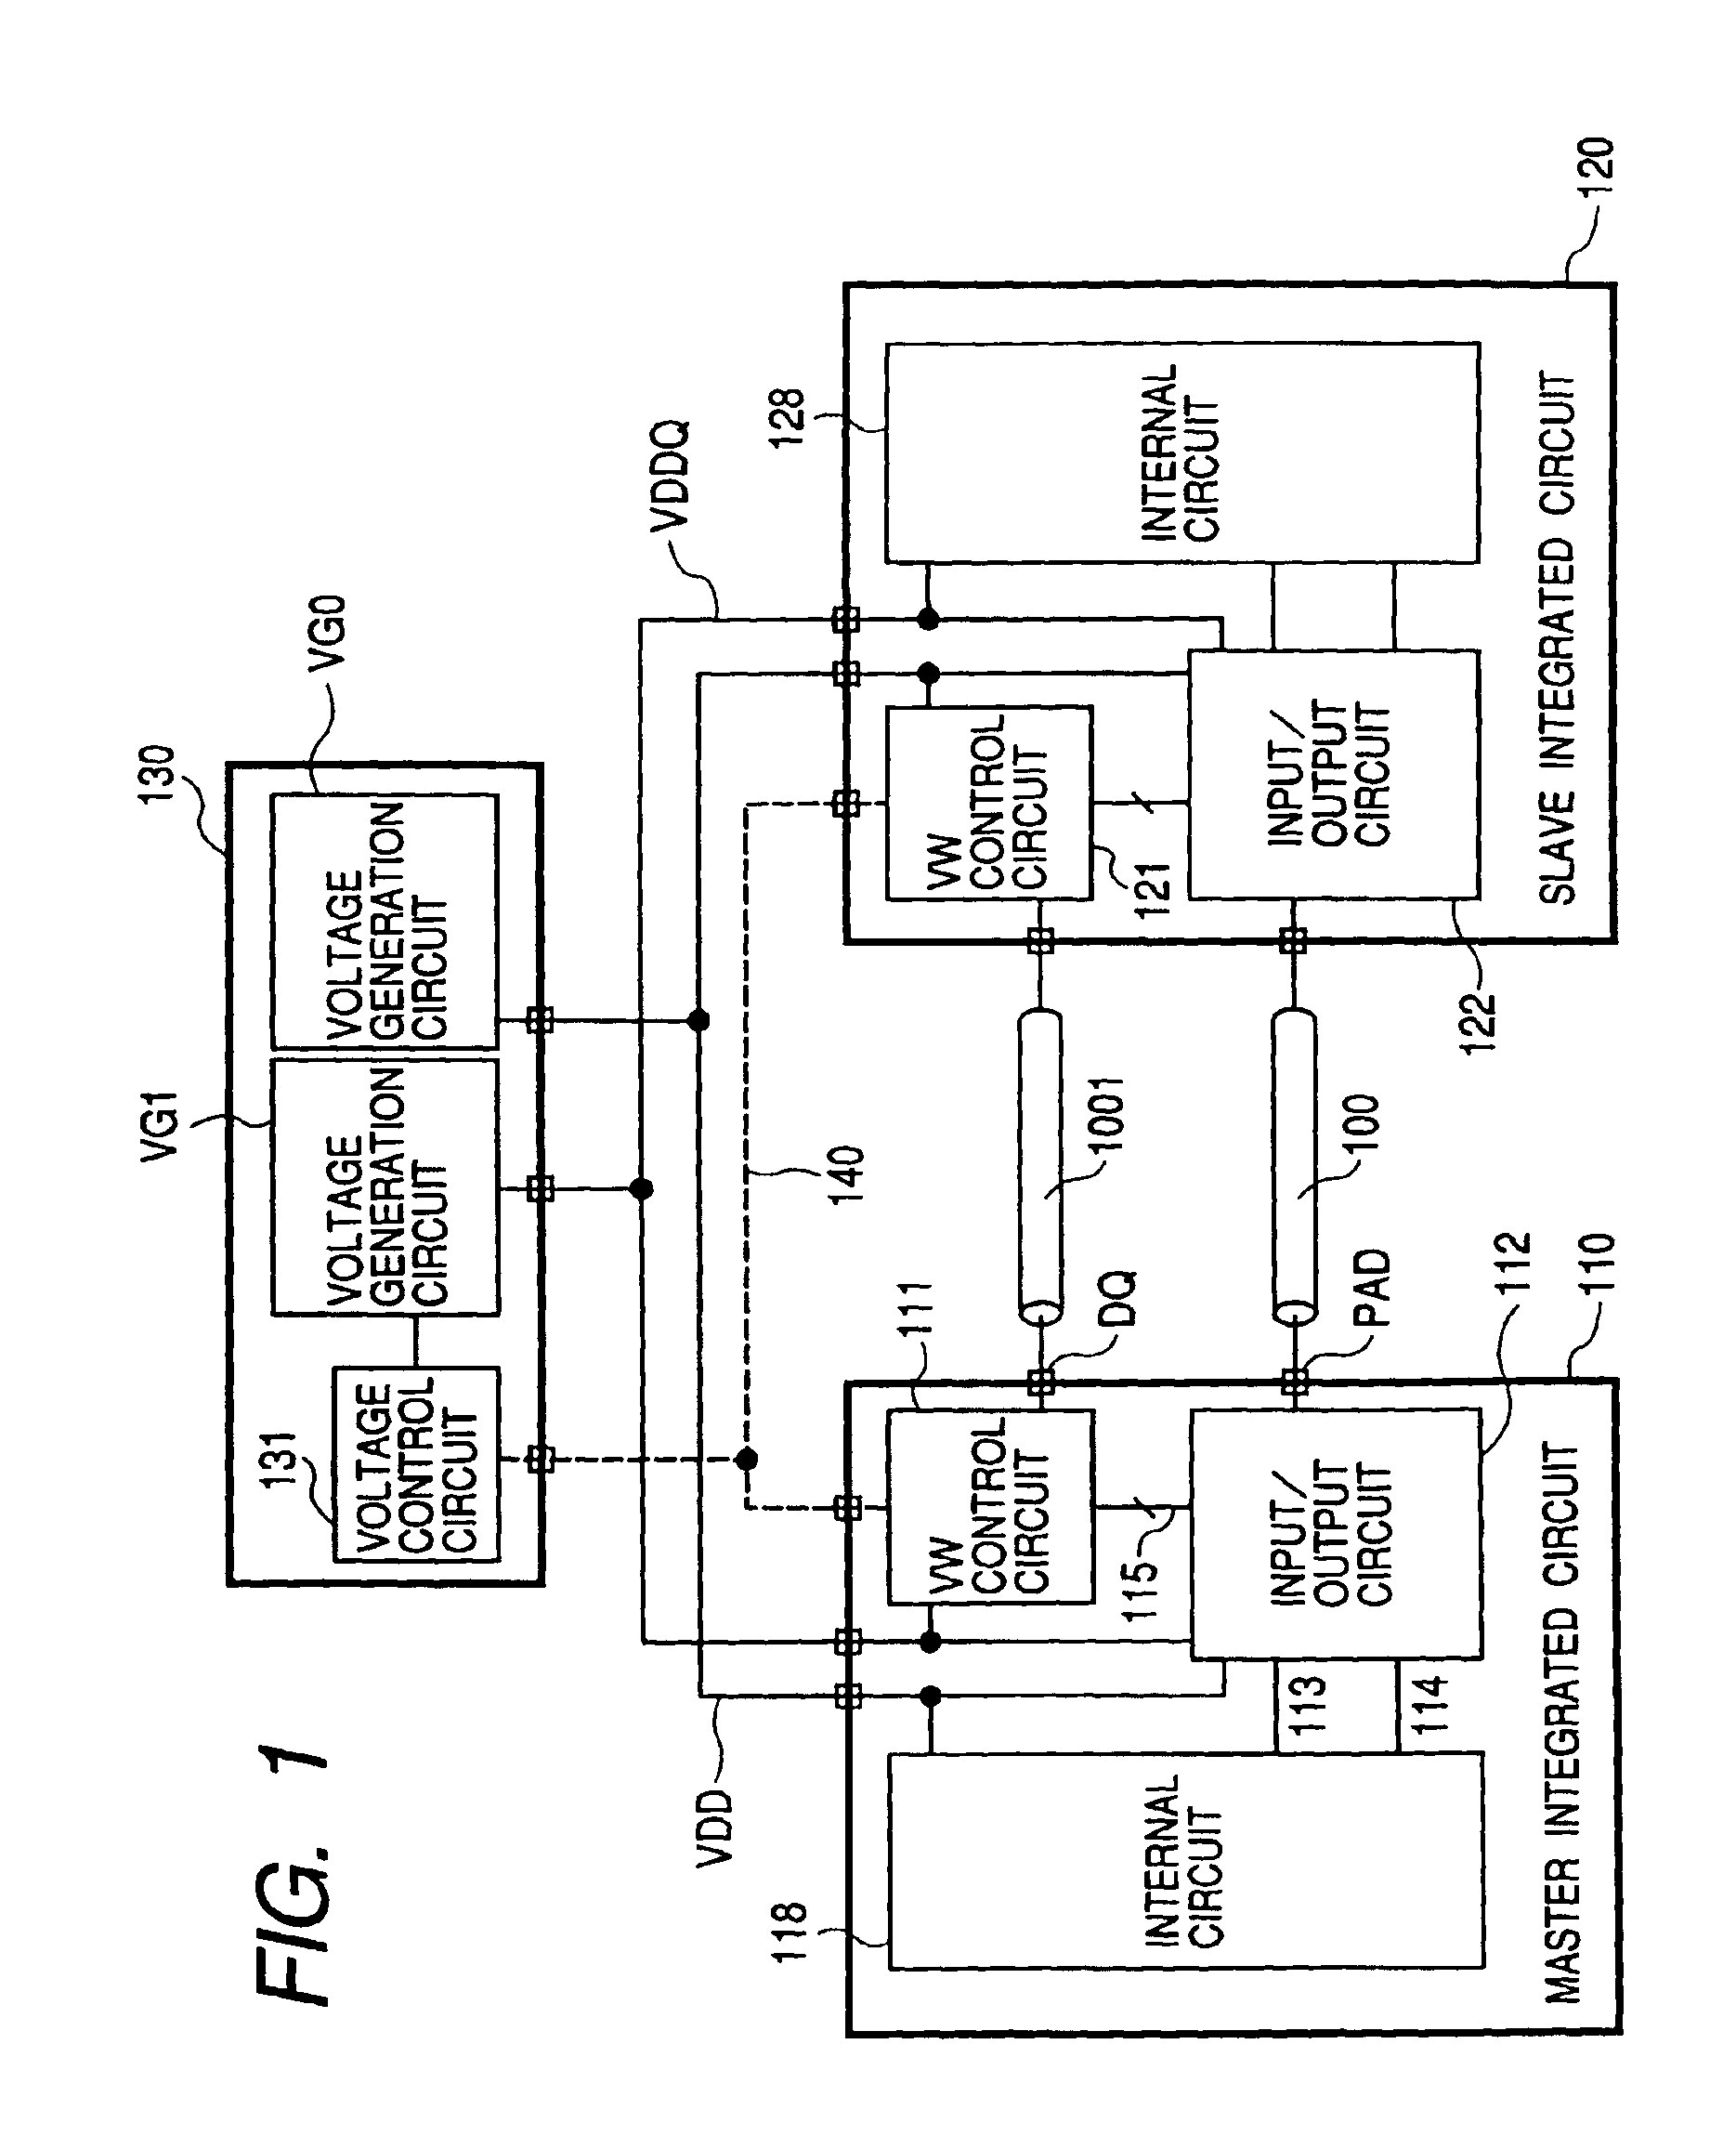 Output buffer circuit with control circuit for modifying supply voltage and transistor size